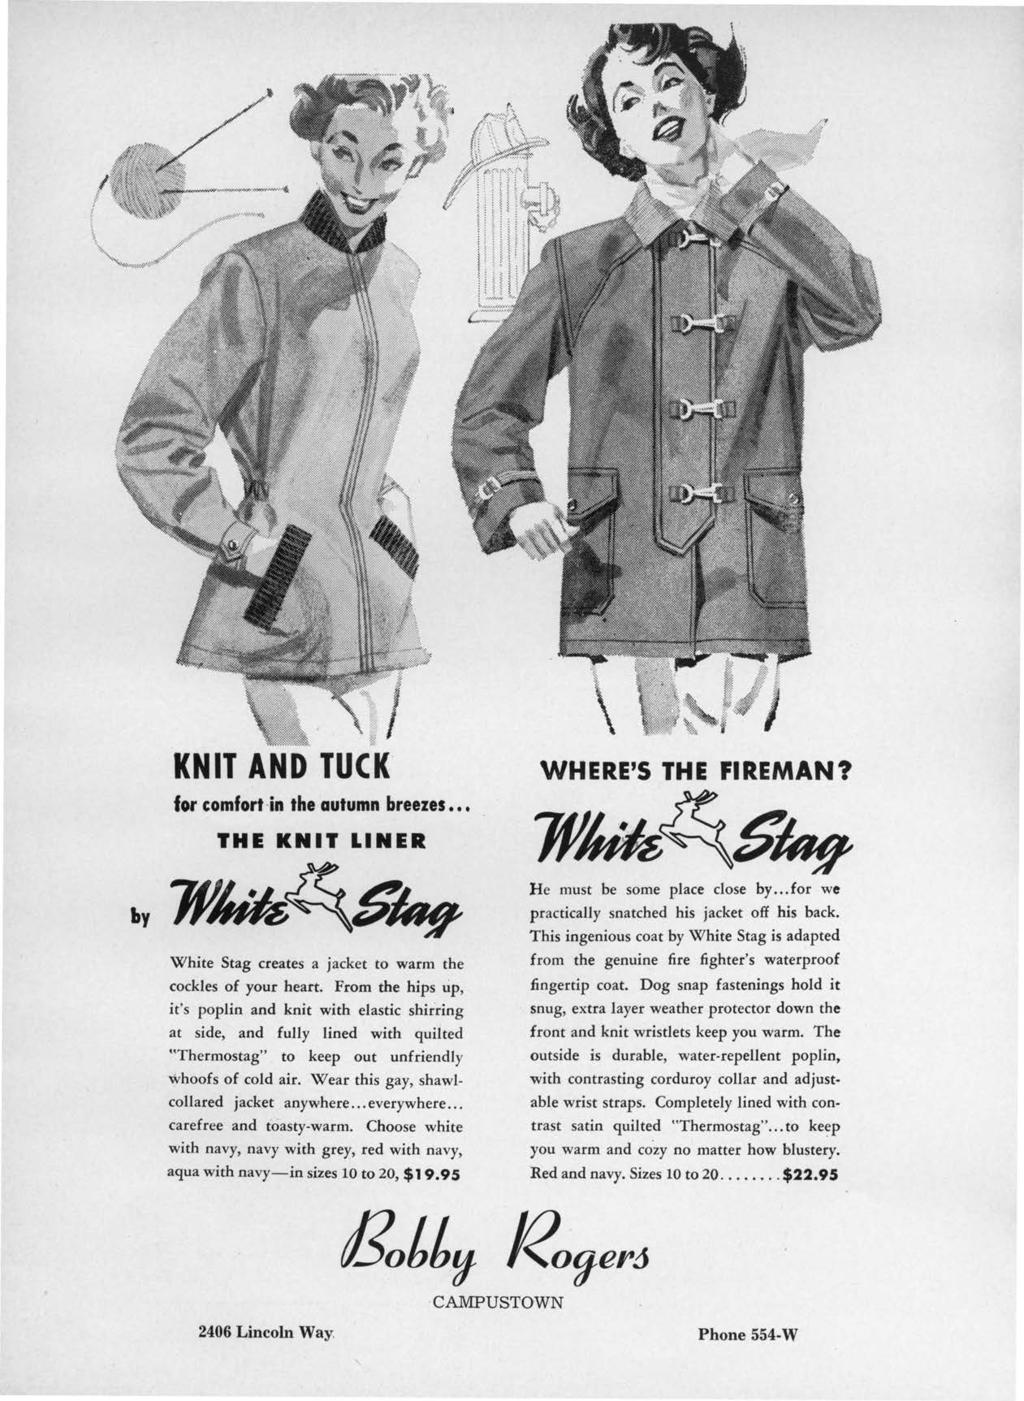 hy KNIT AND TUCK for comfort in the autumn breezes.. THE KNIT LINER White Stag creates a jacket to warm the cockles of your heart.